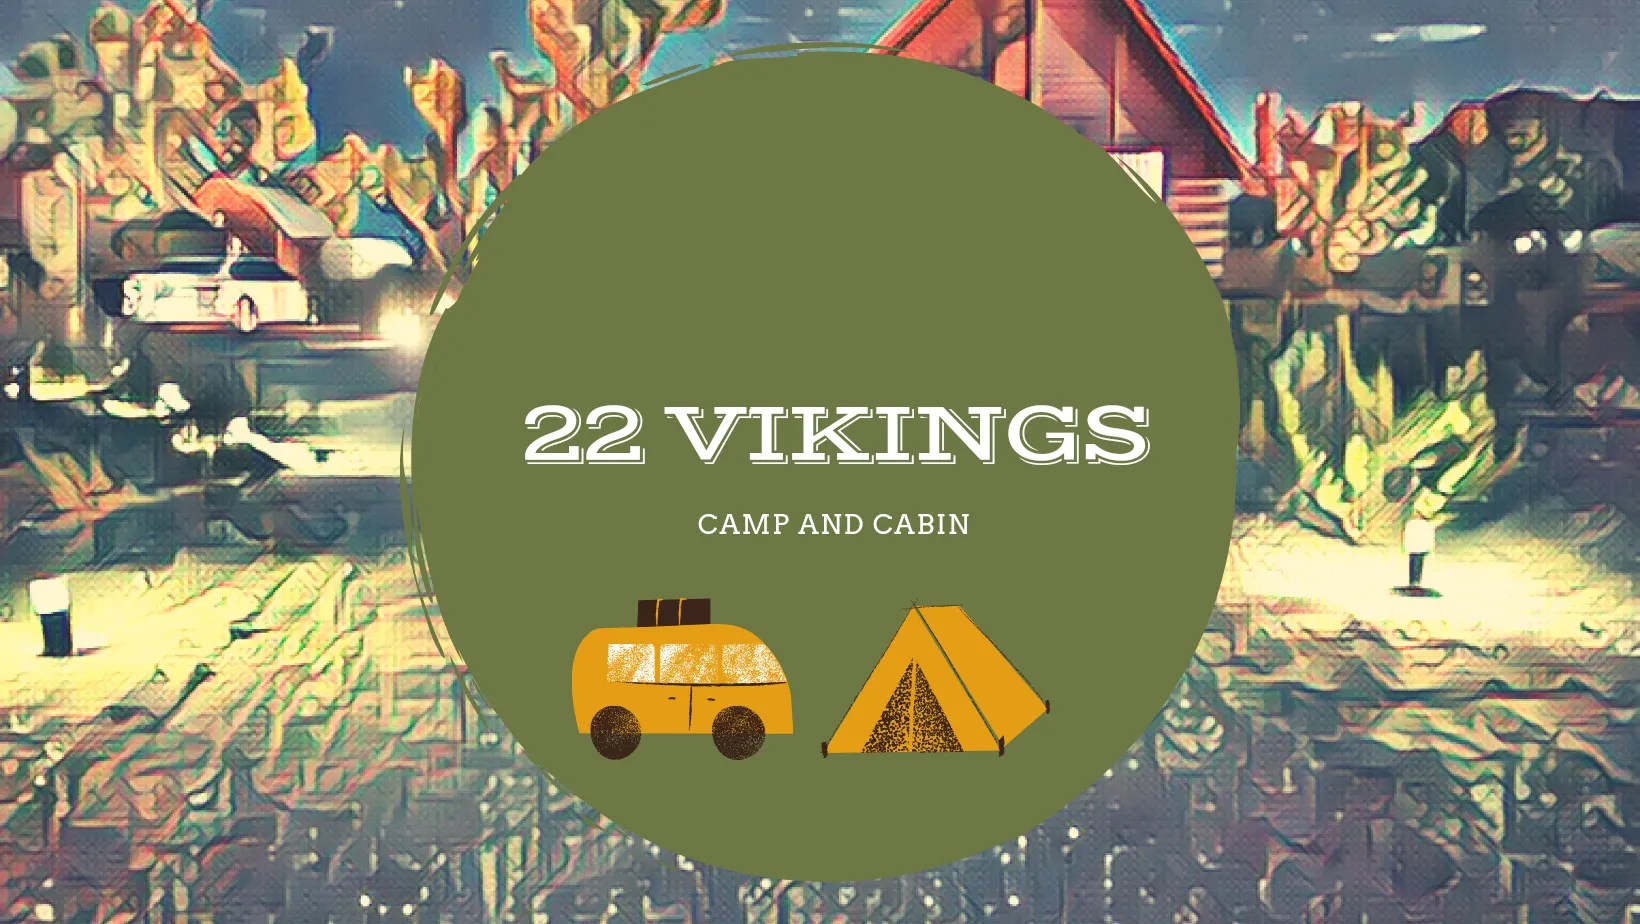 Camper submitted image from 22 Vikings Camp and Cabin - 1